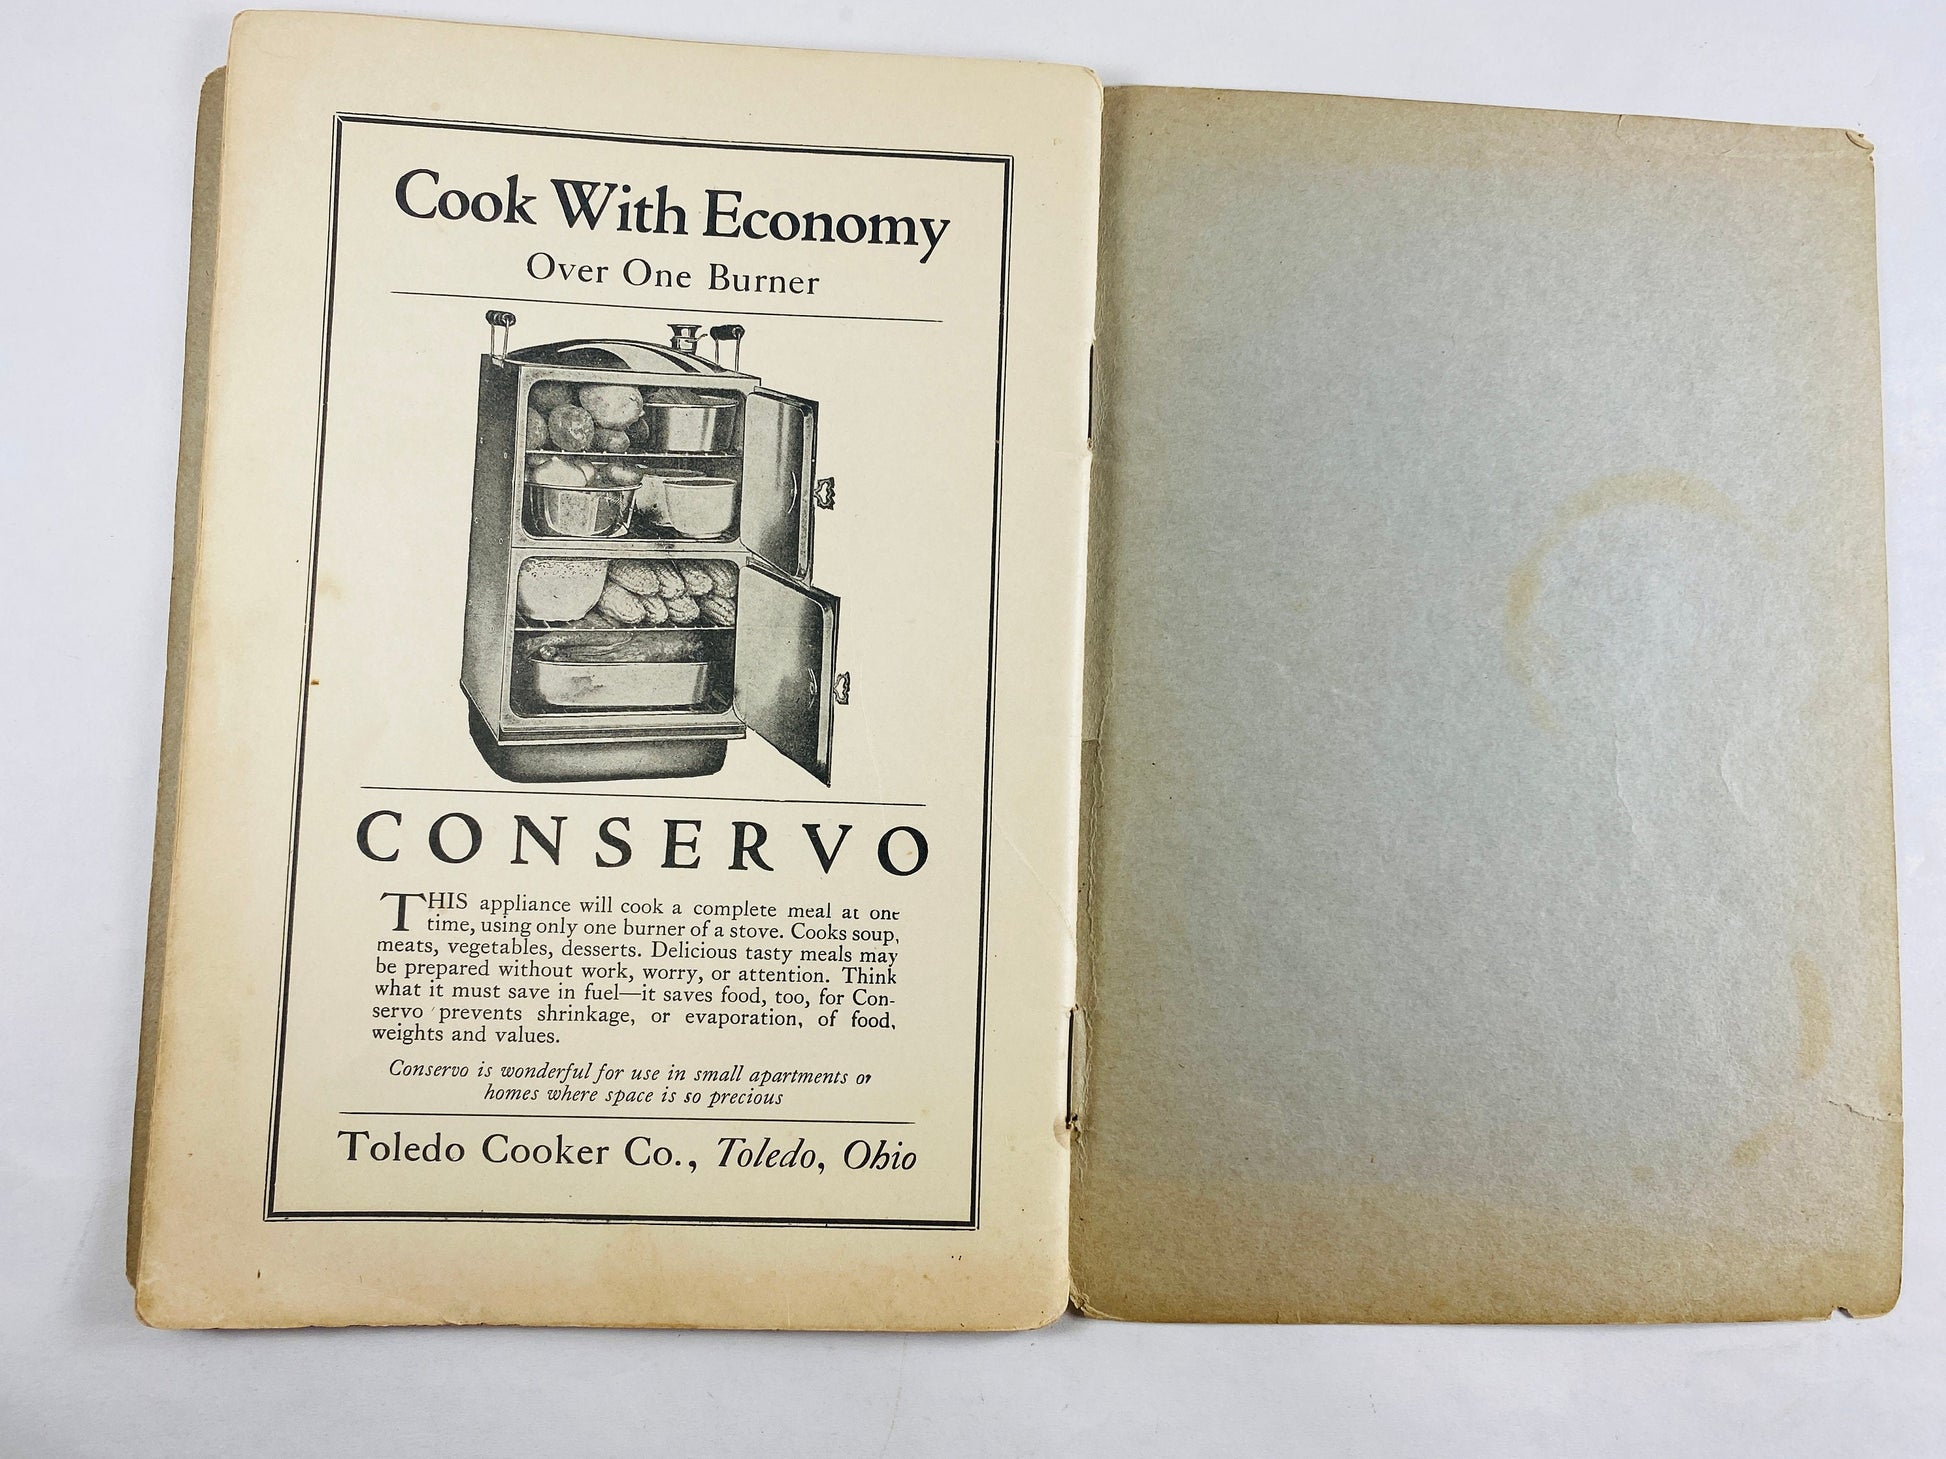 1919 Fireless Stove Vintage owners guide cookbook for Toledo Fireless Cookstove ranges Paperback manual stove oven retro kitchen